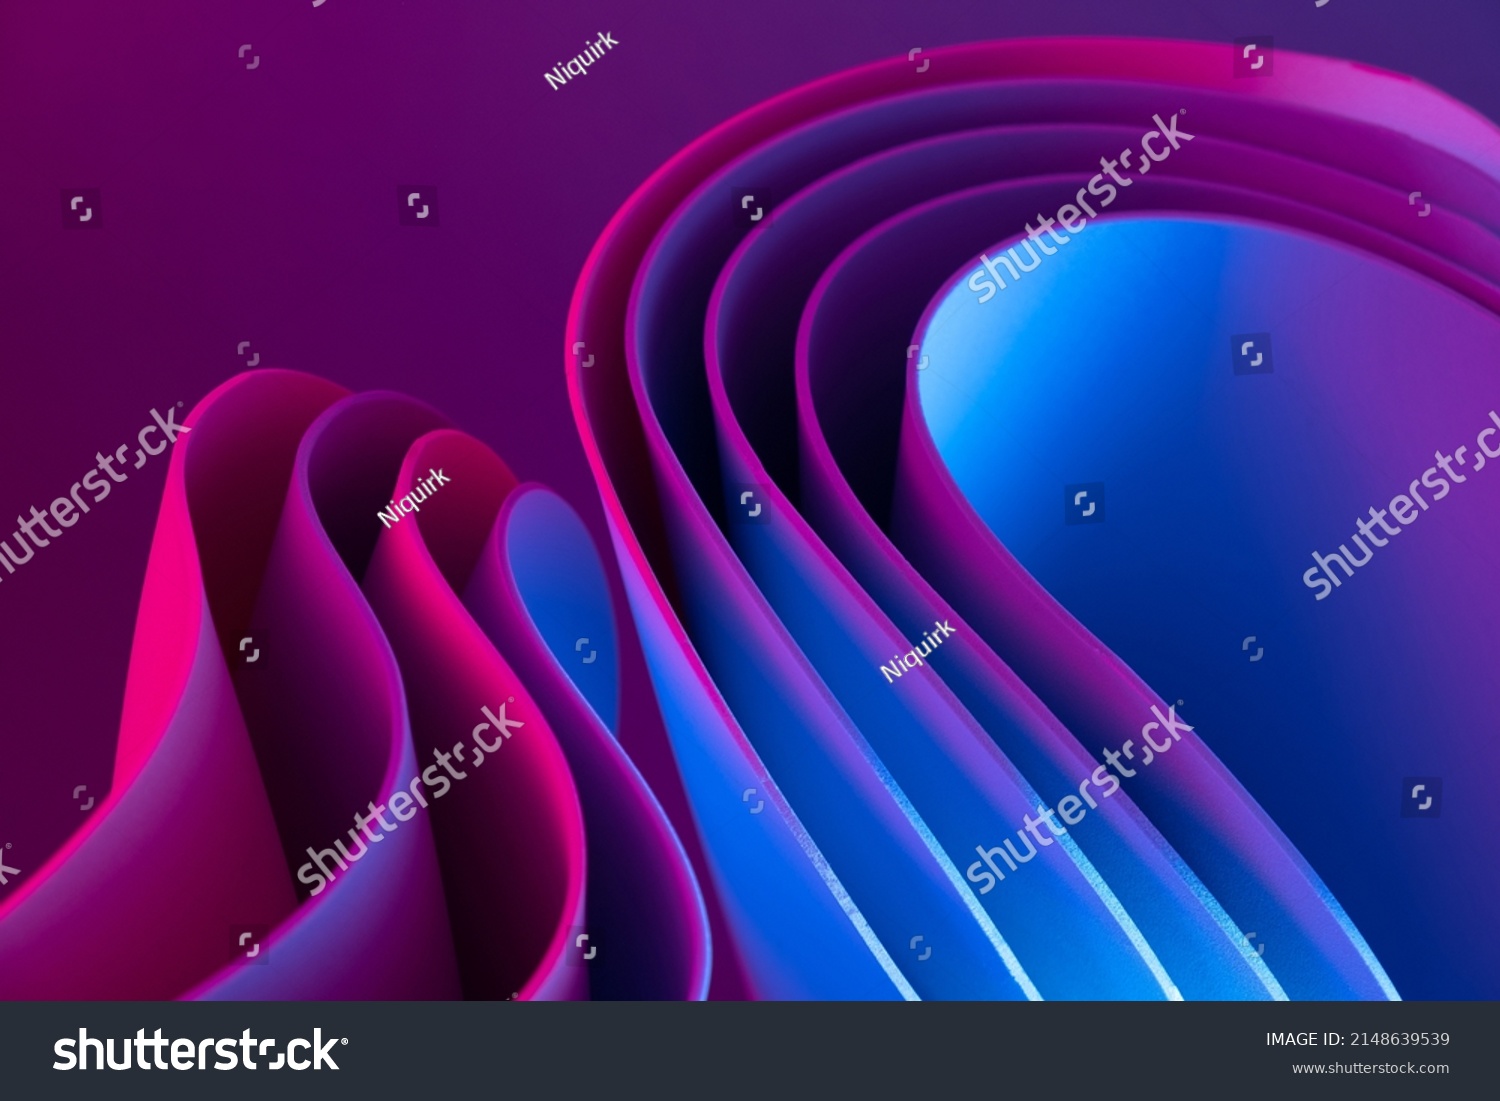 Colorful motion elements with neon led illumination. Abstract futuristic background. #2148639539